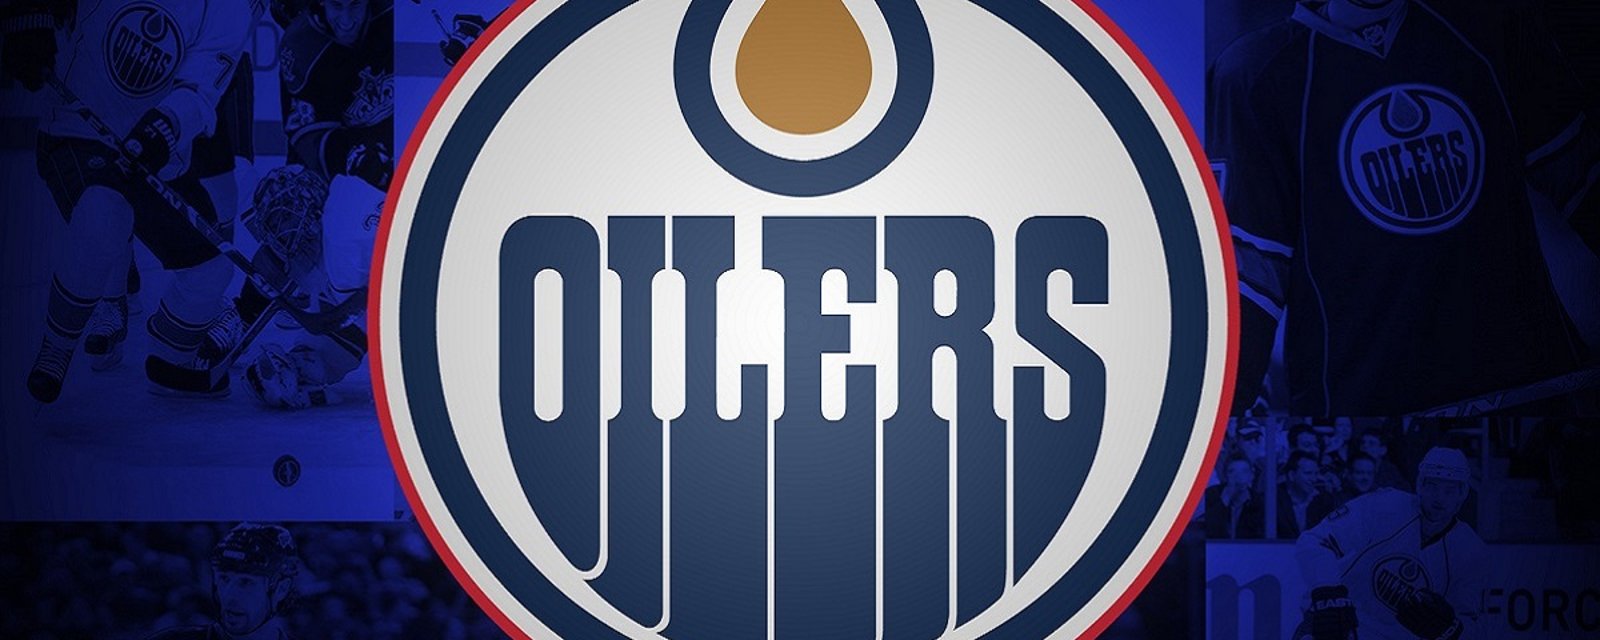 Two sources indicate the Oilers are looking to make a trade soon.